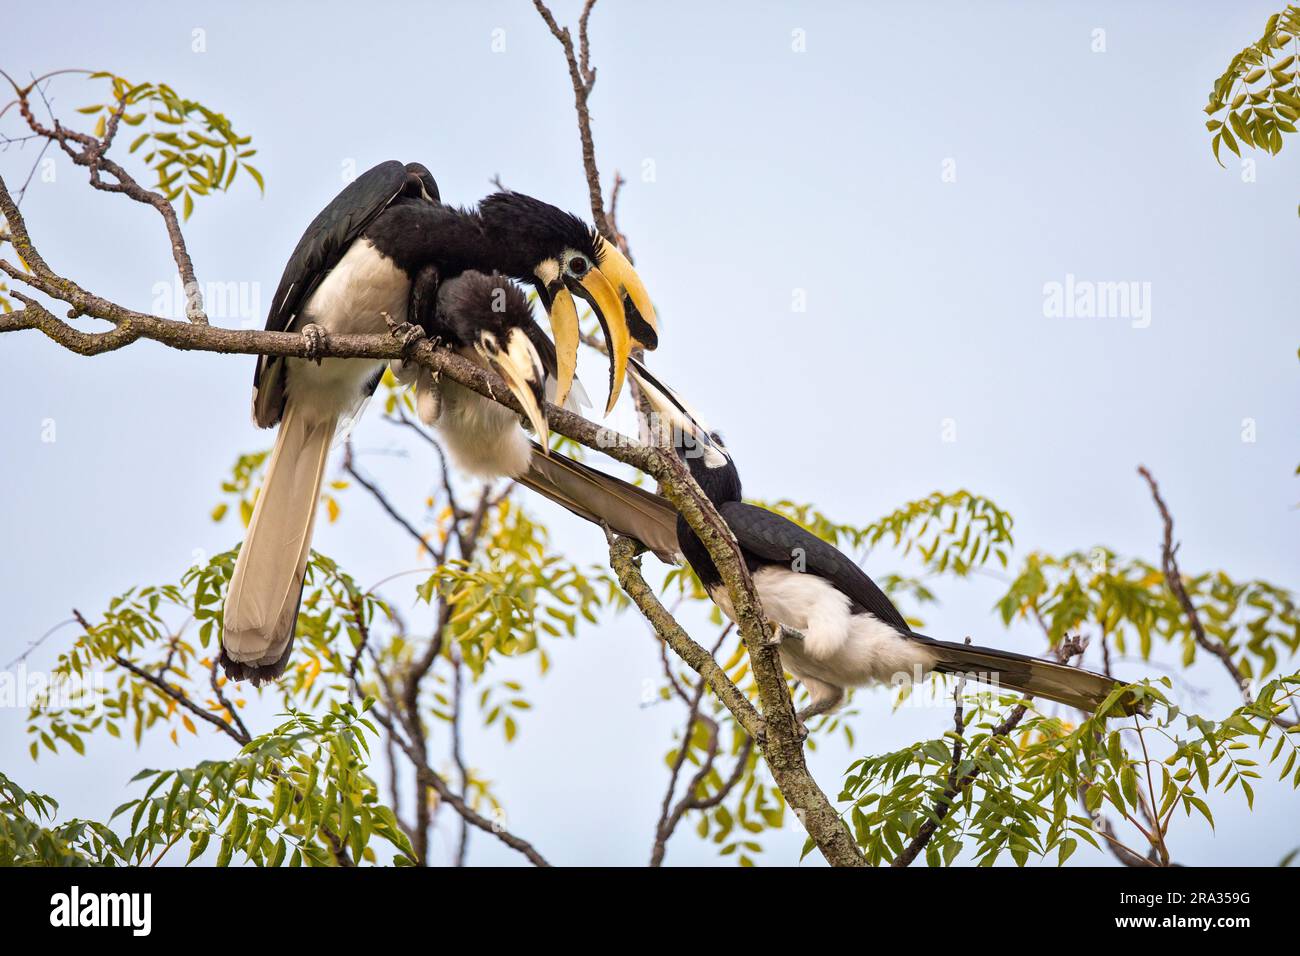 A pair of orientlal pied hornbills engage in courtship behaviour while another female intervenes, Singapore Stock Photo